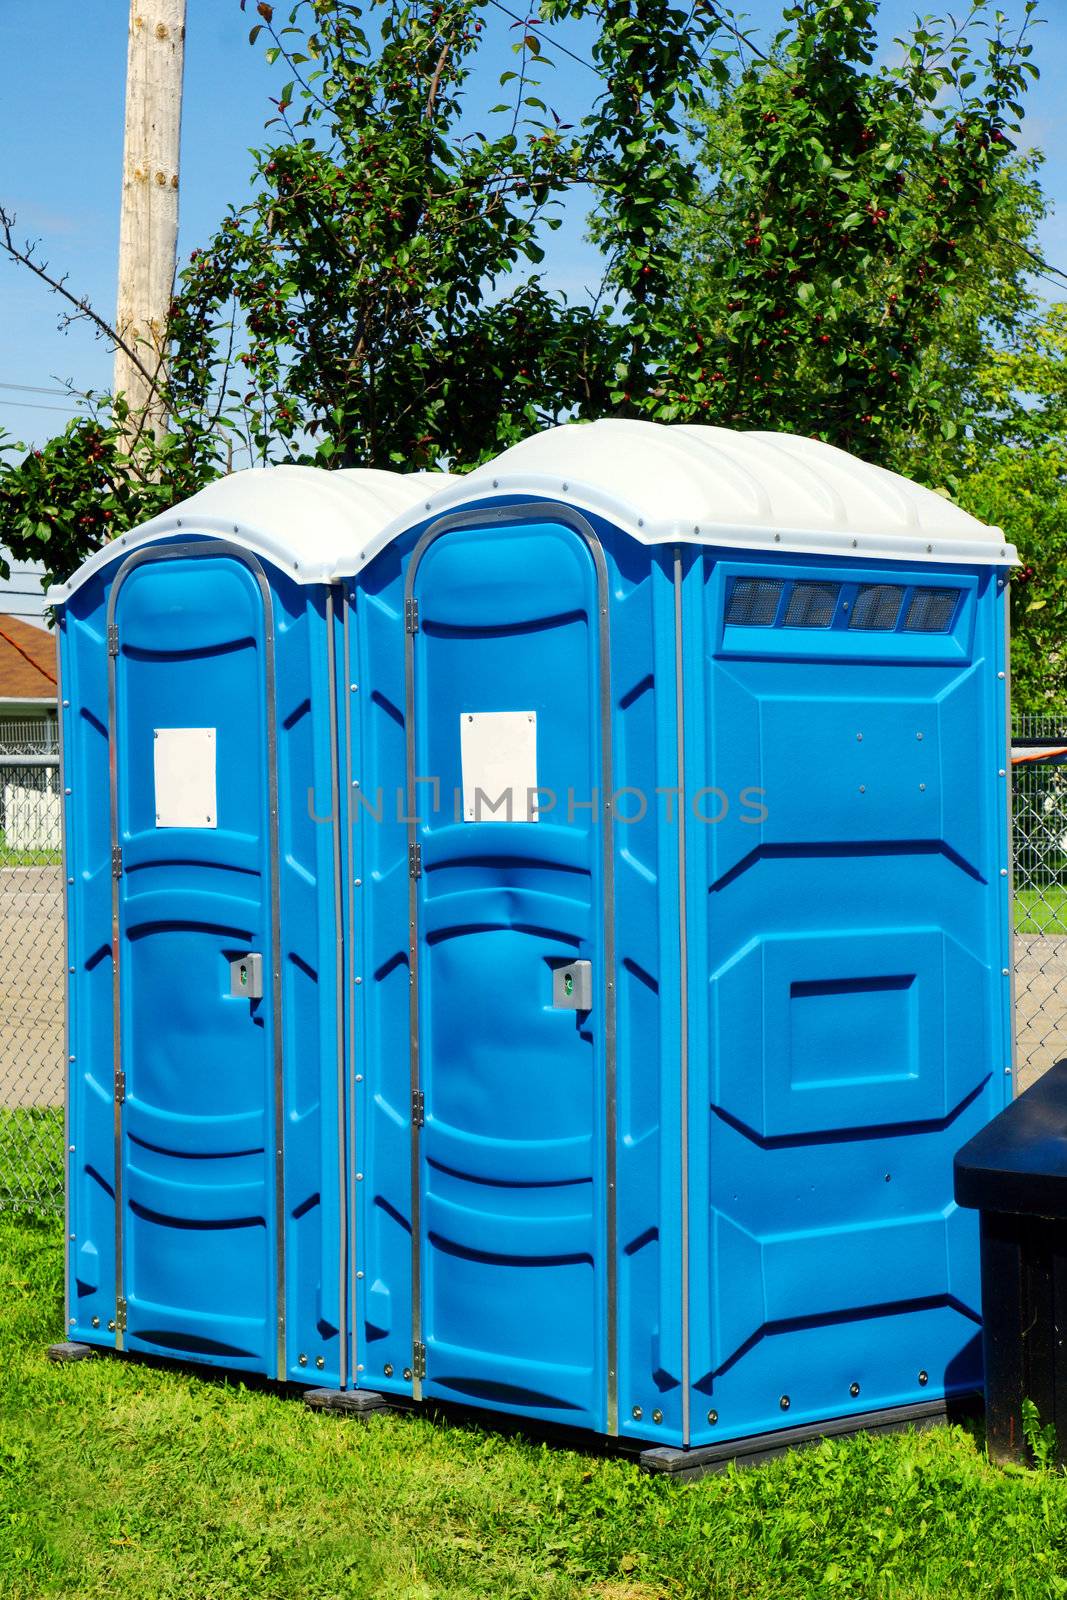 Portable toilets on grass by Mirage3